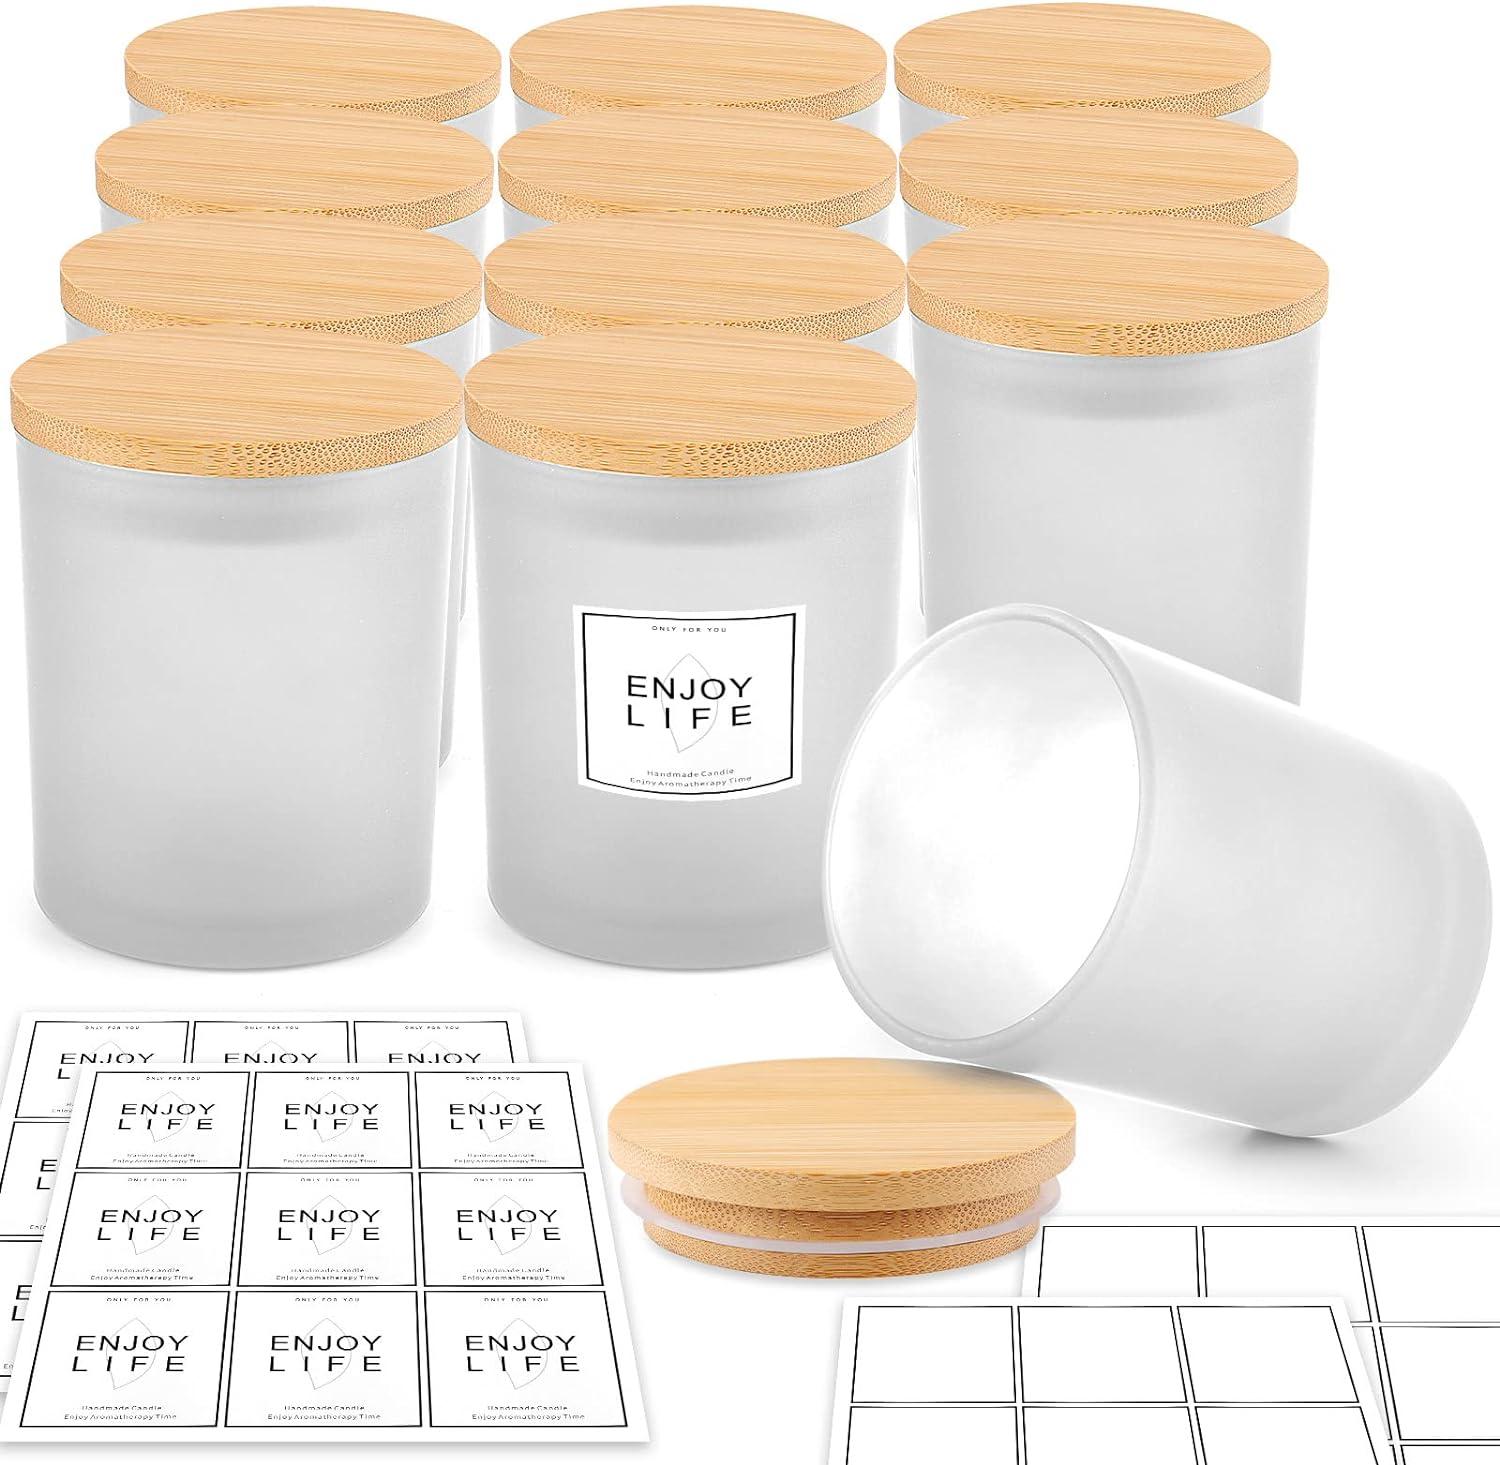 TRUE CANDLE 14oz Frosted White Glass Candle Jars | 6X Candle Jar - Each  with a Matching Box | Illuminating Empty Candle Jars for Making Candles.